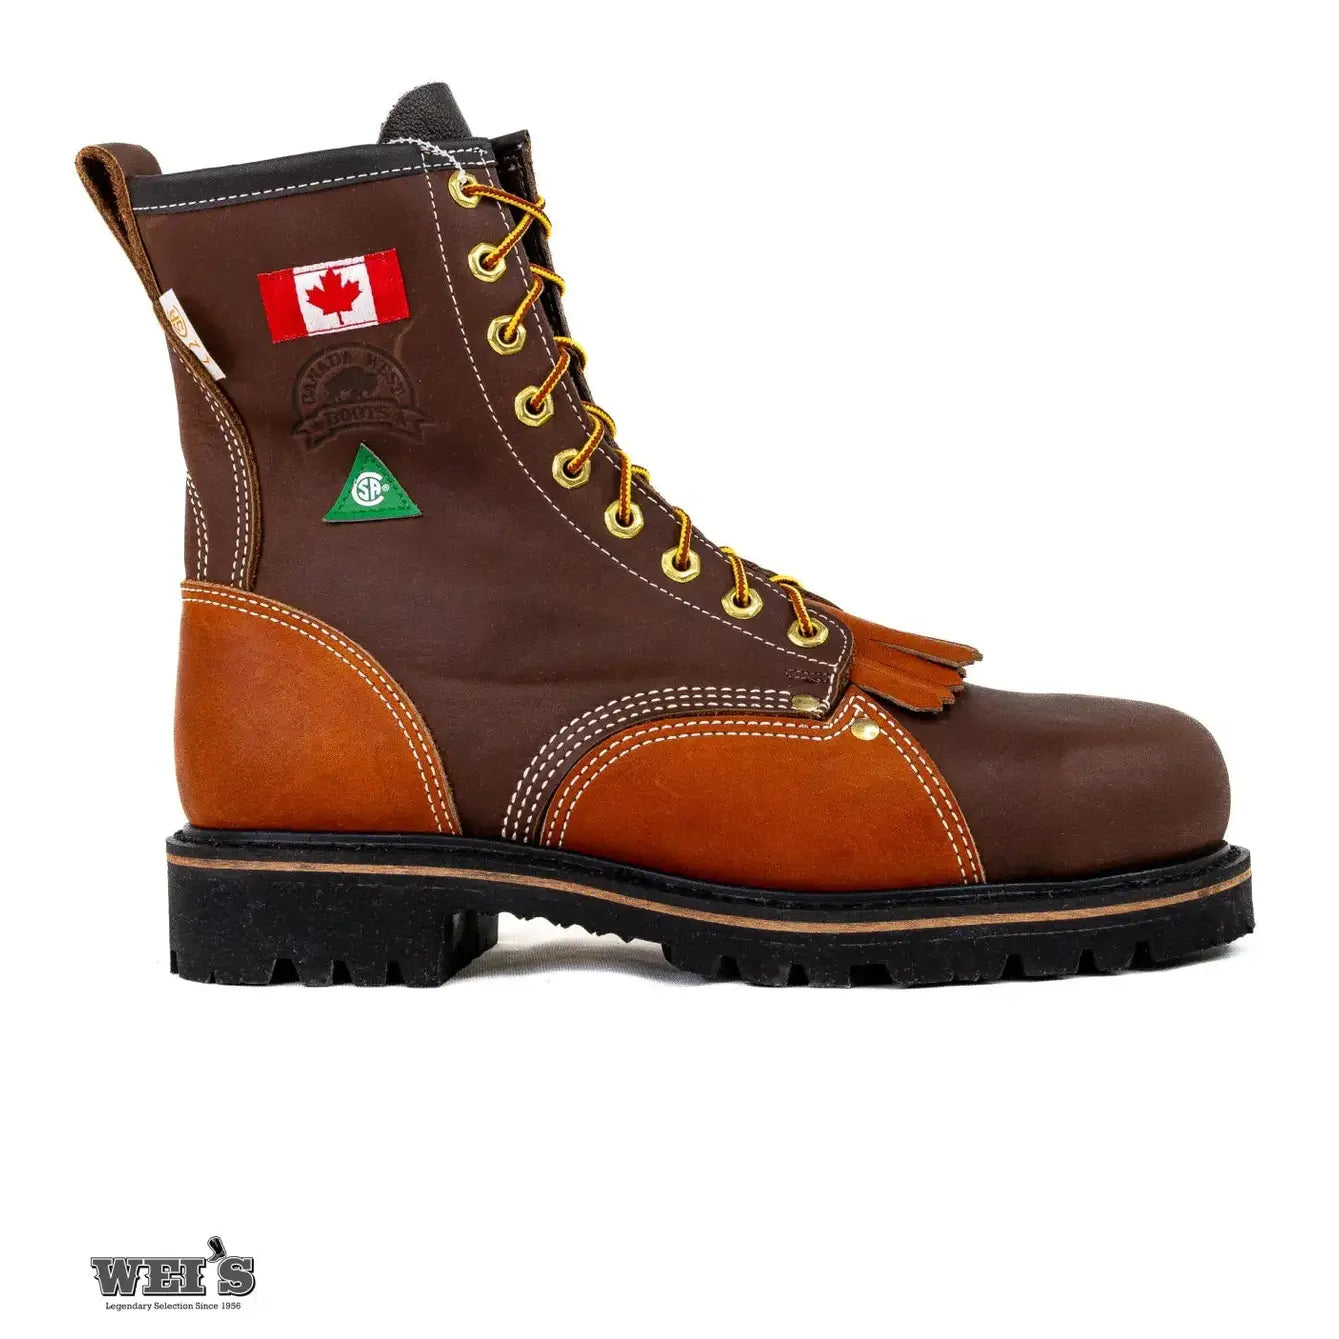 Canada West Men's Work Lace-Up Steel Toe Boots 34309 - Canada West Boots